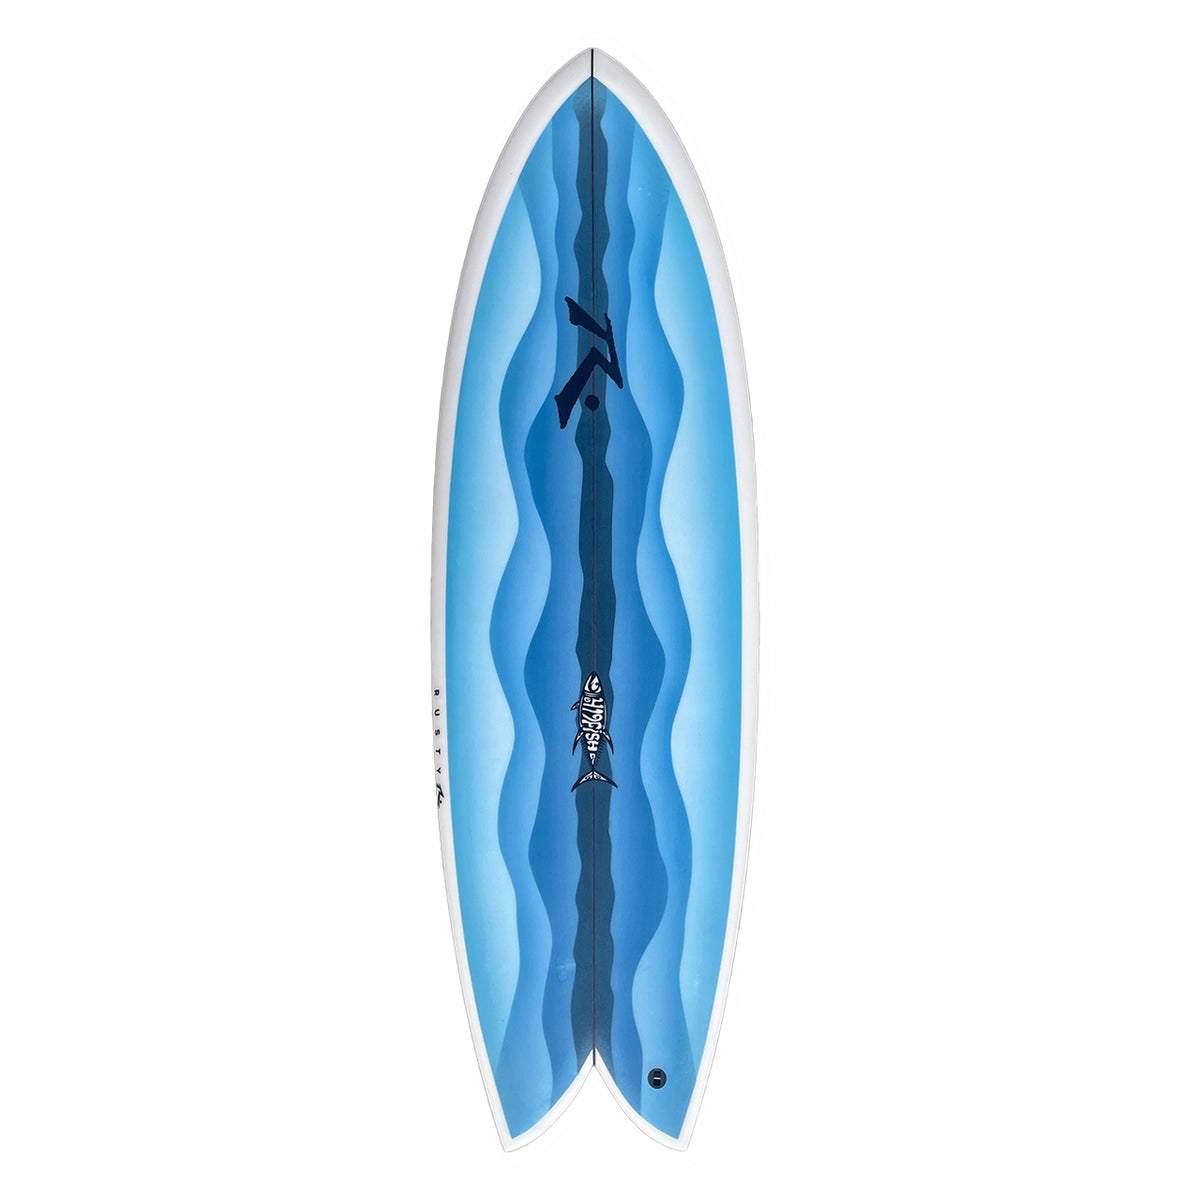 419fish - Alternative - Rusty Surfboards - Top View - Blue Waves